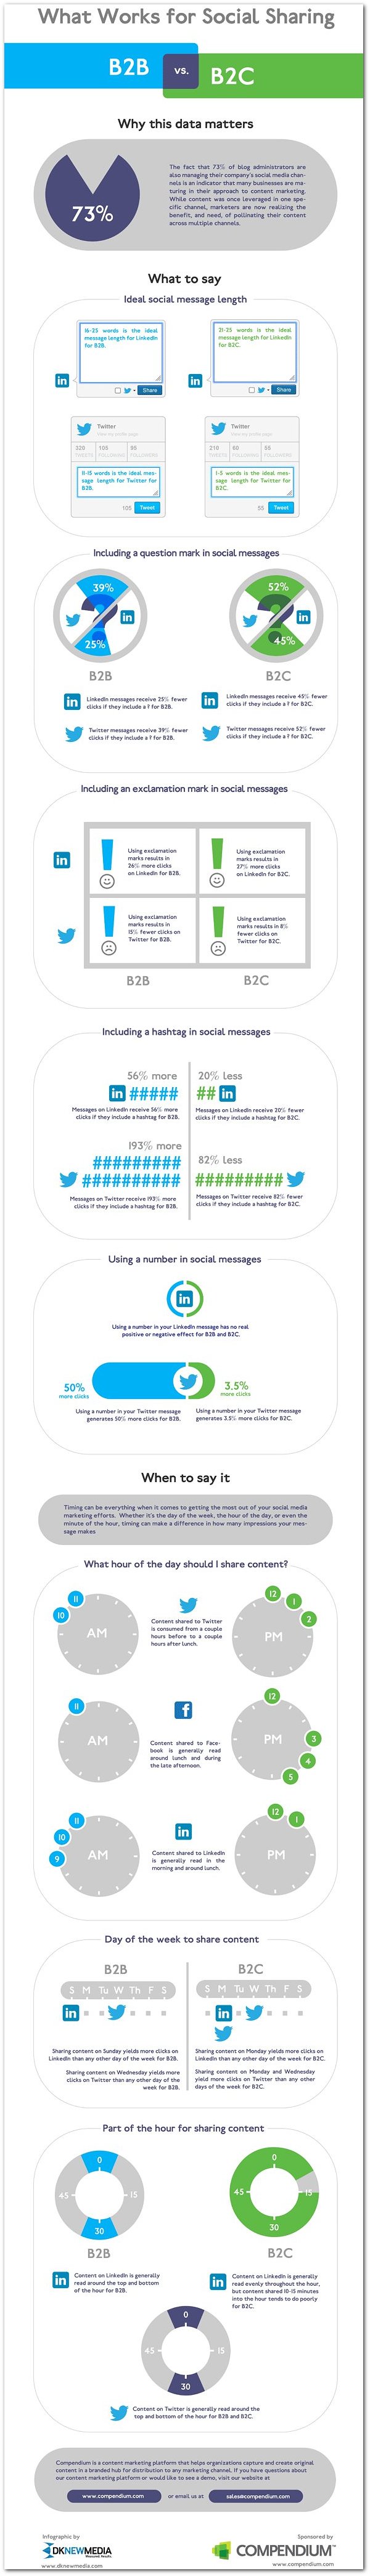 [Infographic] What Works for Social Sharing: B2B vs. B2C